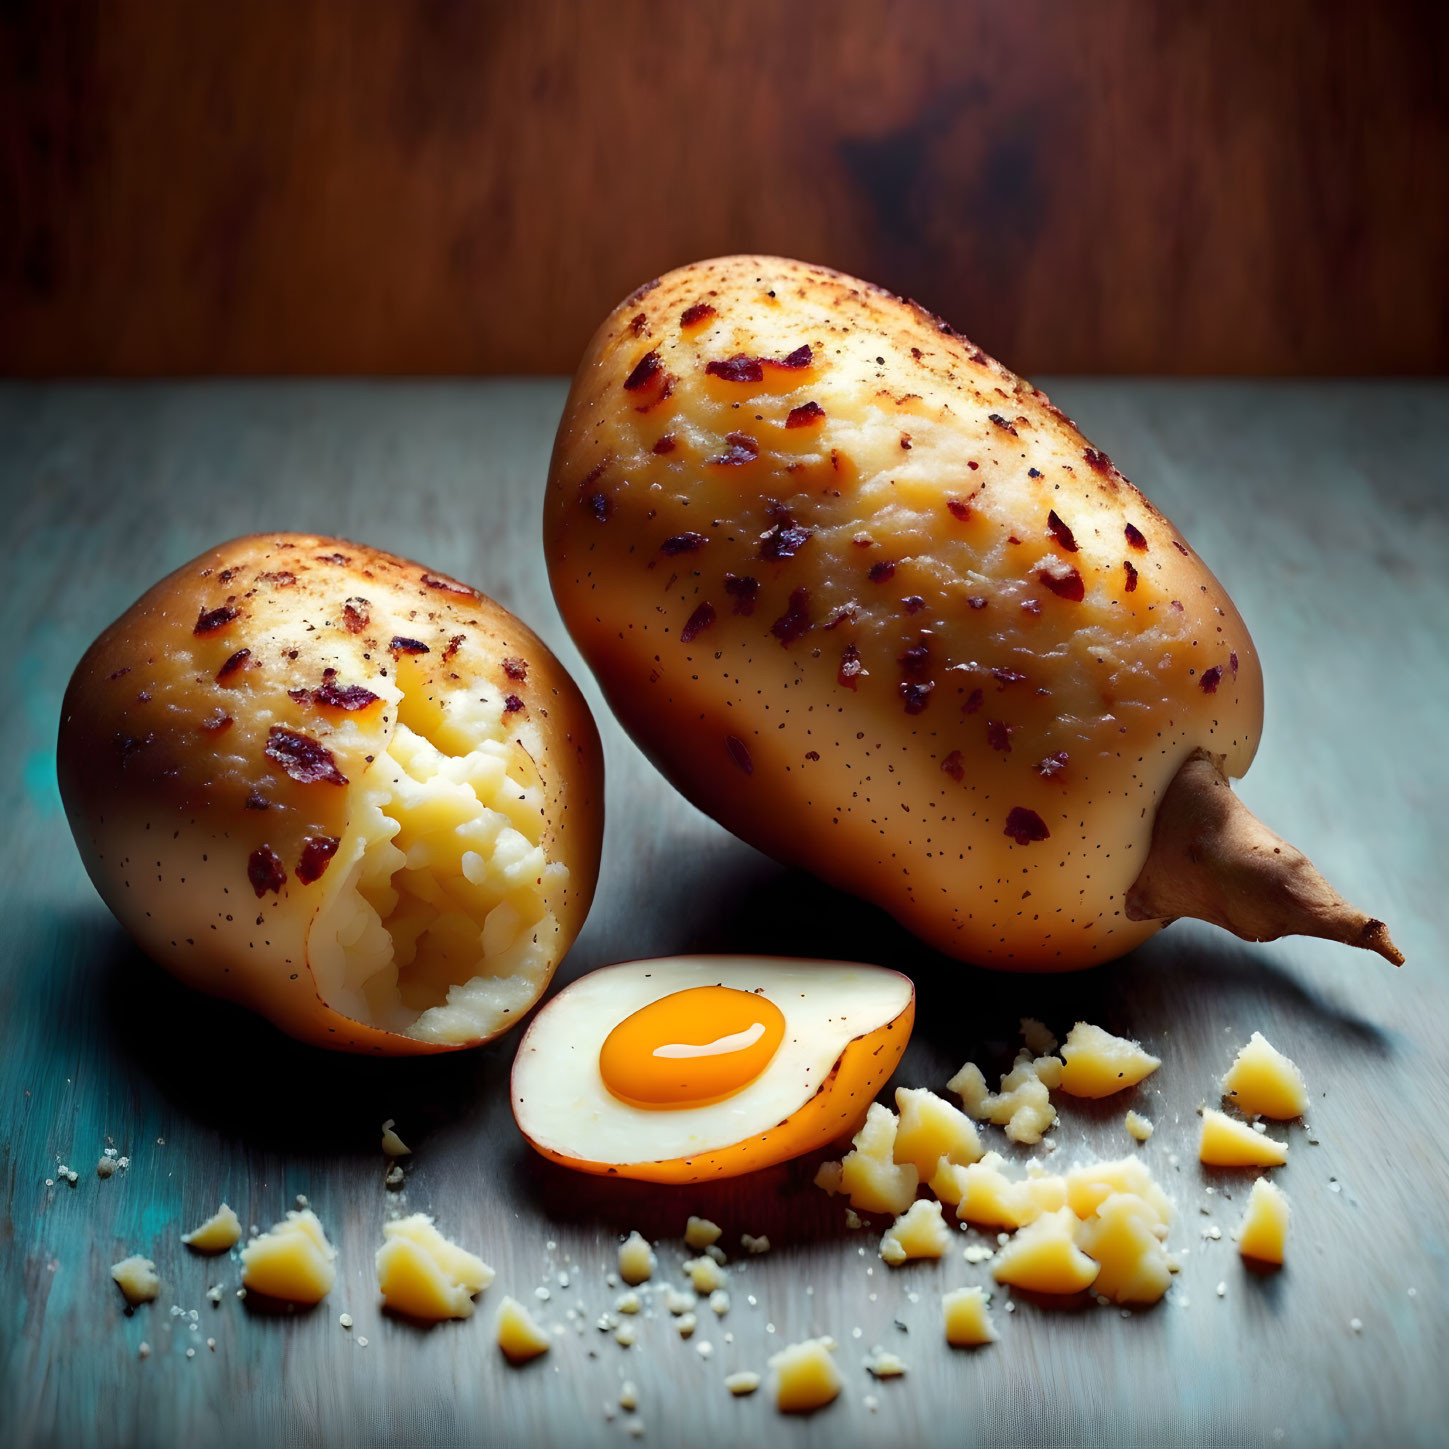 Roasted Potatoes with Melted Cheese and Boiled Egg on Wooden Surface